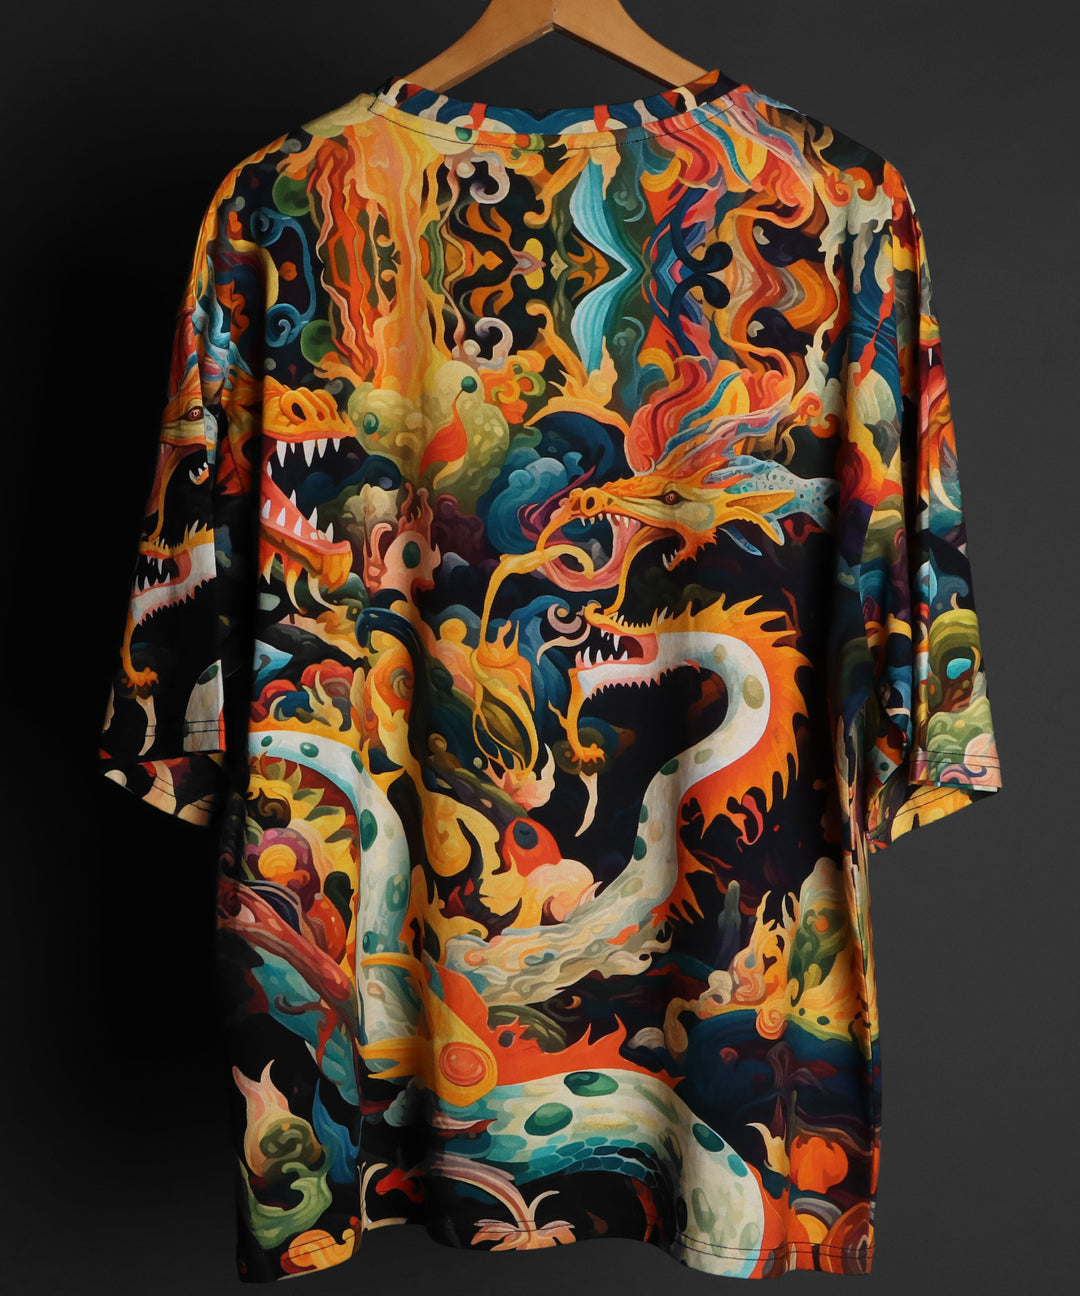 Printed Oversized Tee - QILIN * MEN'S COTTON PRINTED OVER SIZE TEE#65